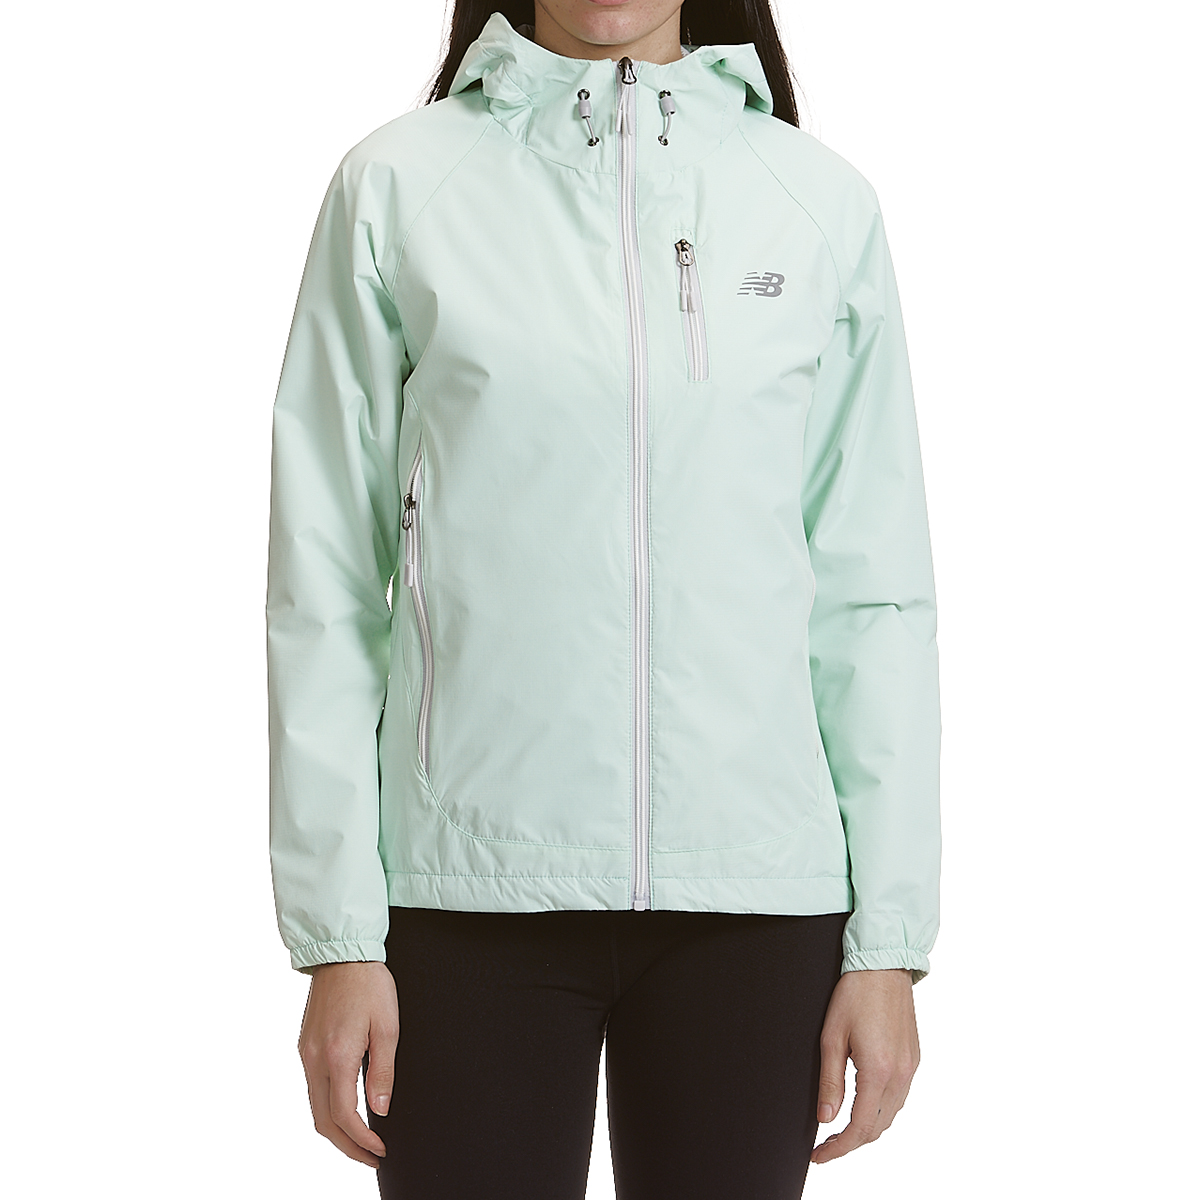 New Balance Women's Solid Dobby Hooded Jacket With Zipped Pockets - Blue, L